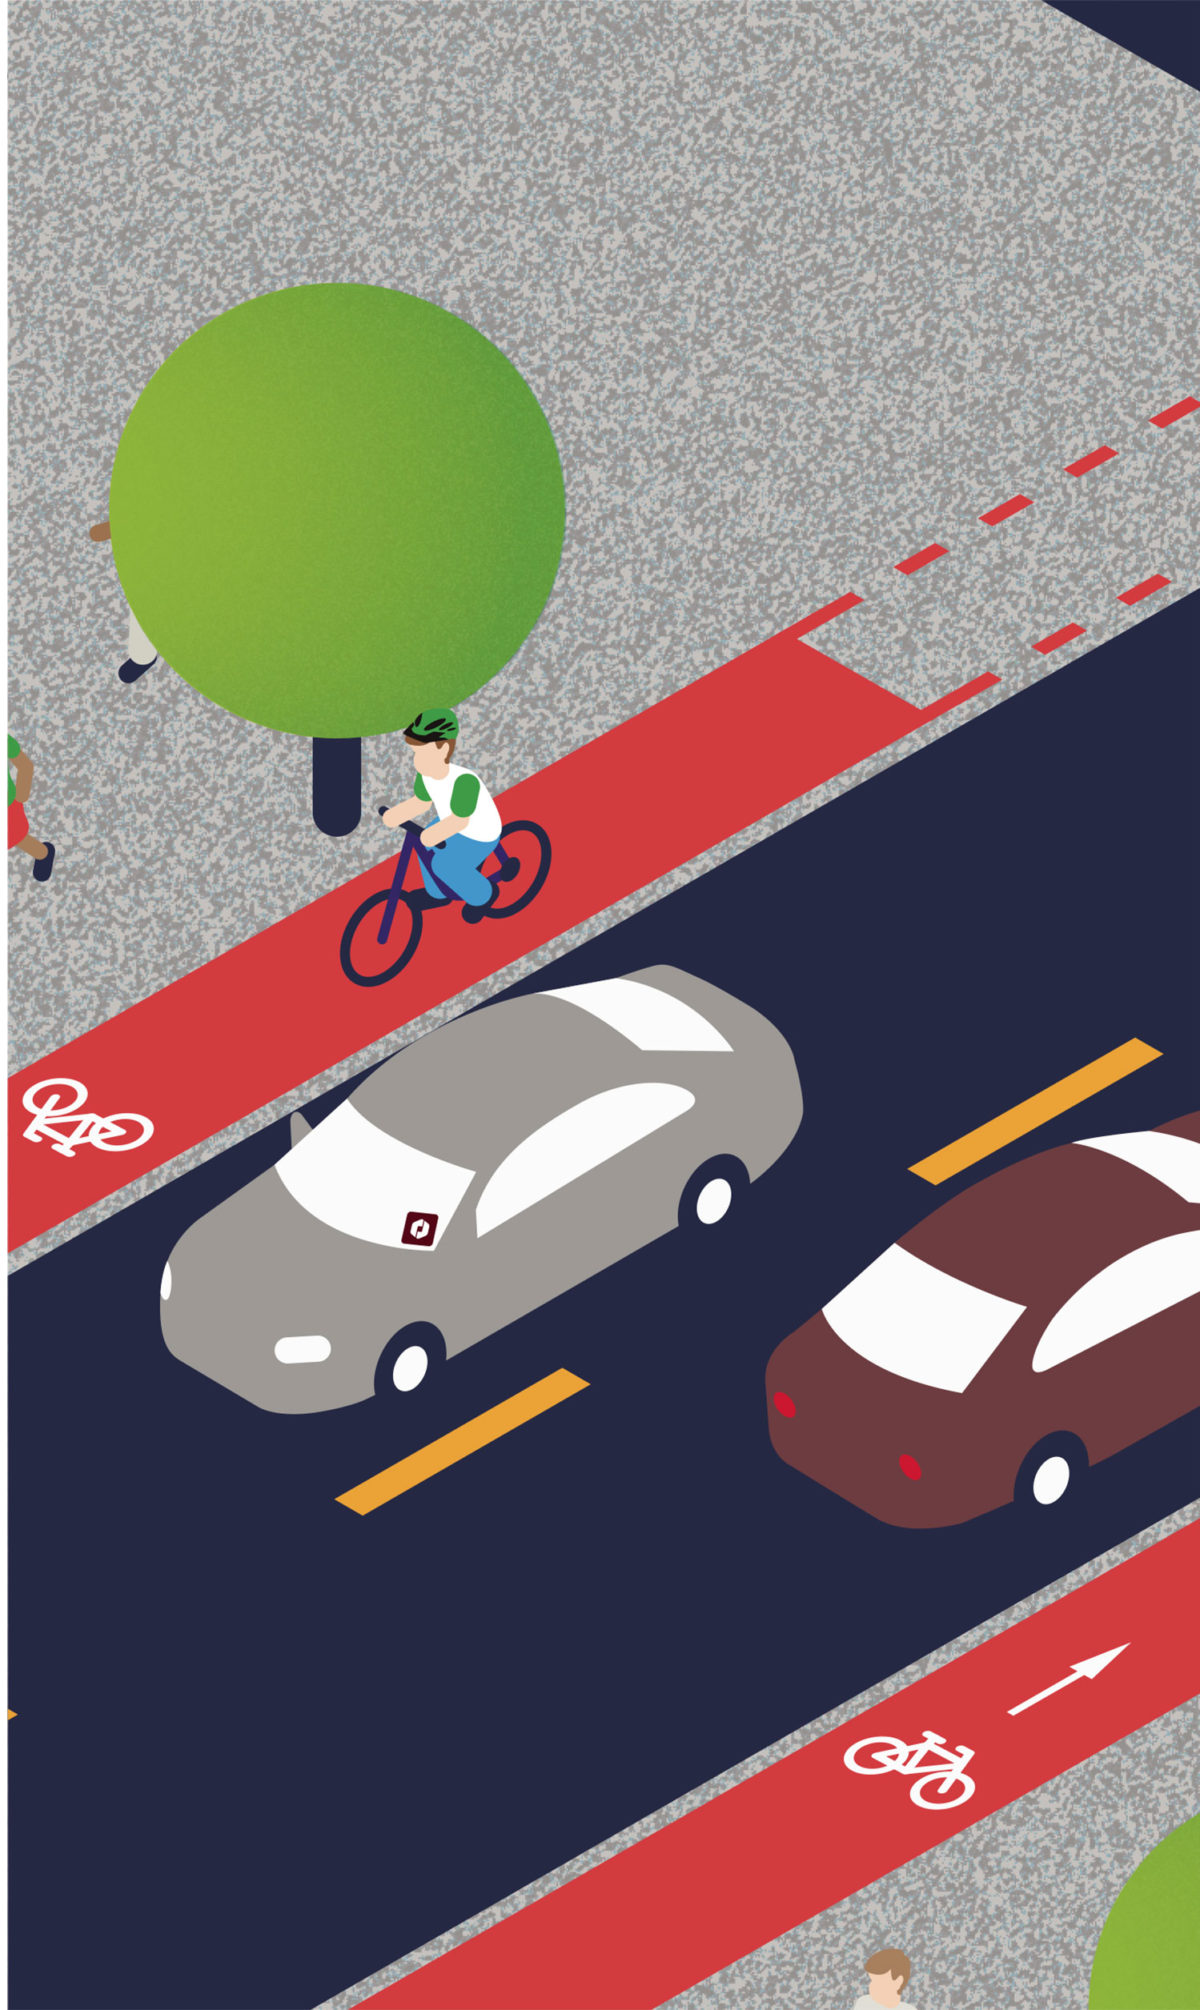 Birds eye view Illustration of cars, bicyclists and joggers